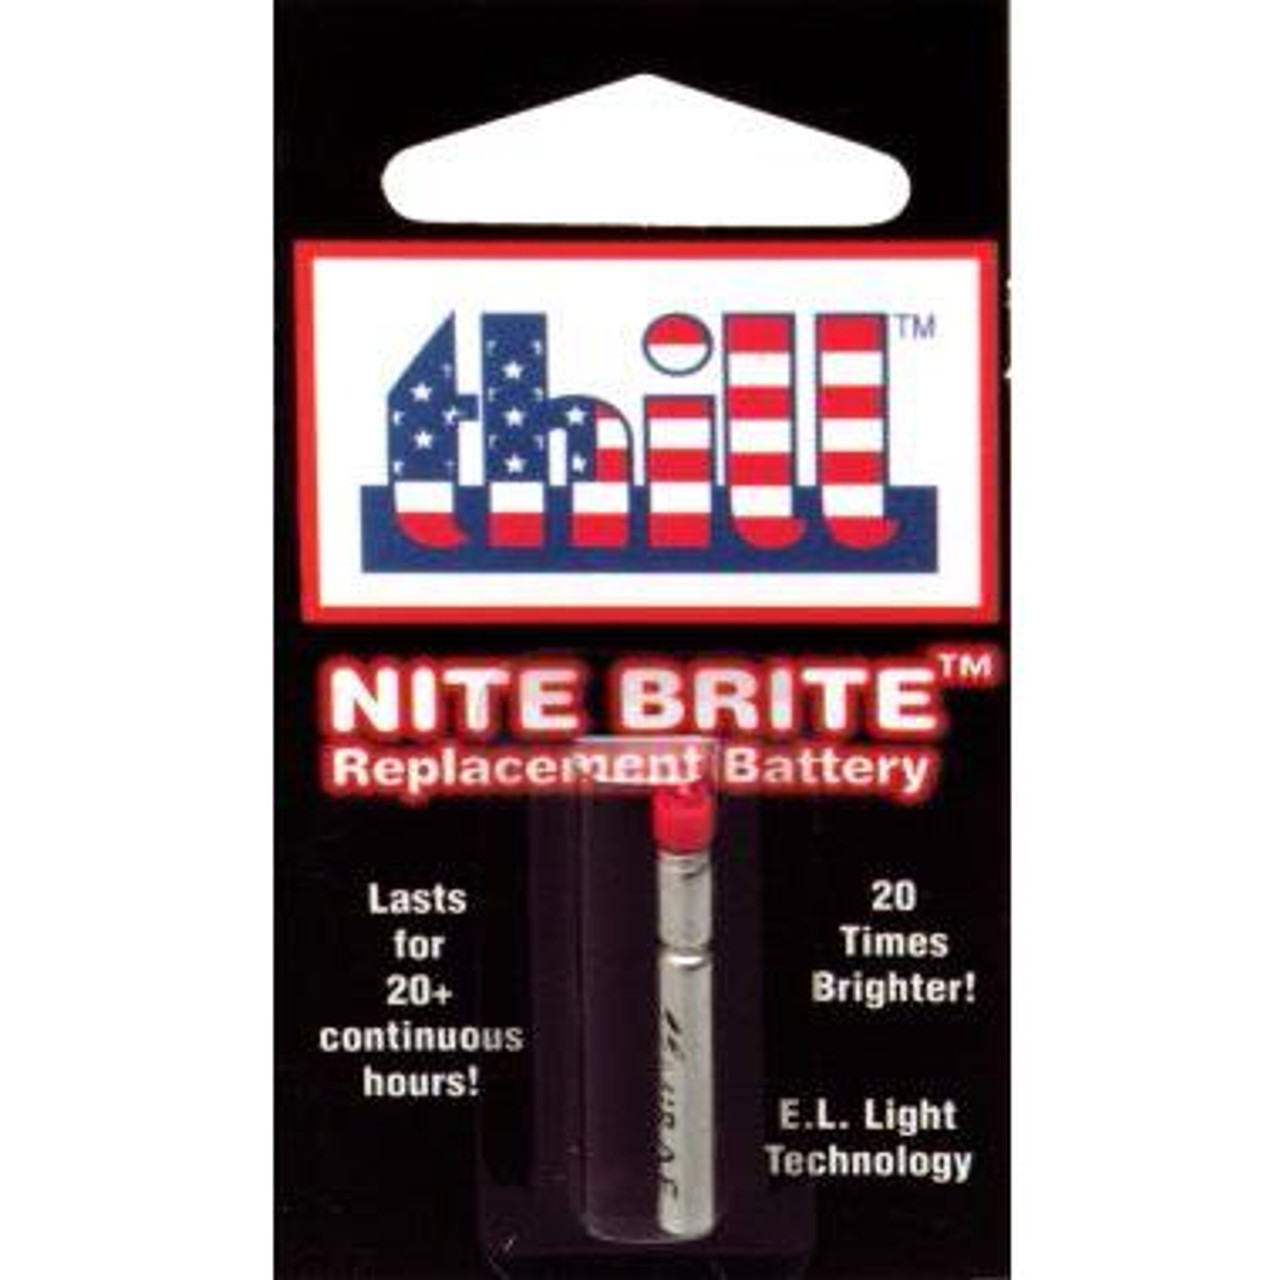 Thill Nite-Brite Replacement Light/Battery #LF110 - GameMasters Outdoors